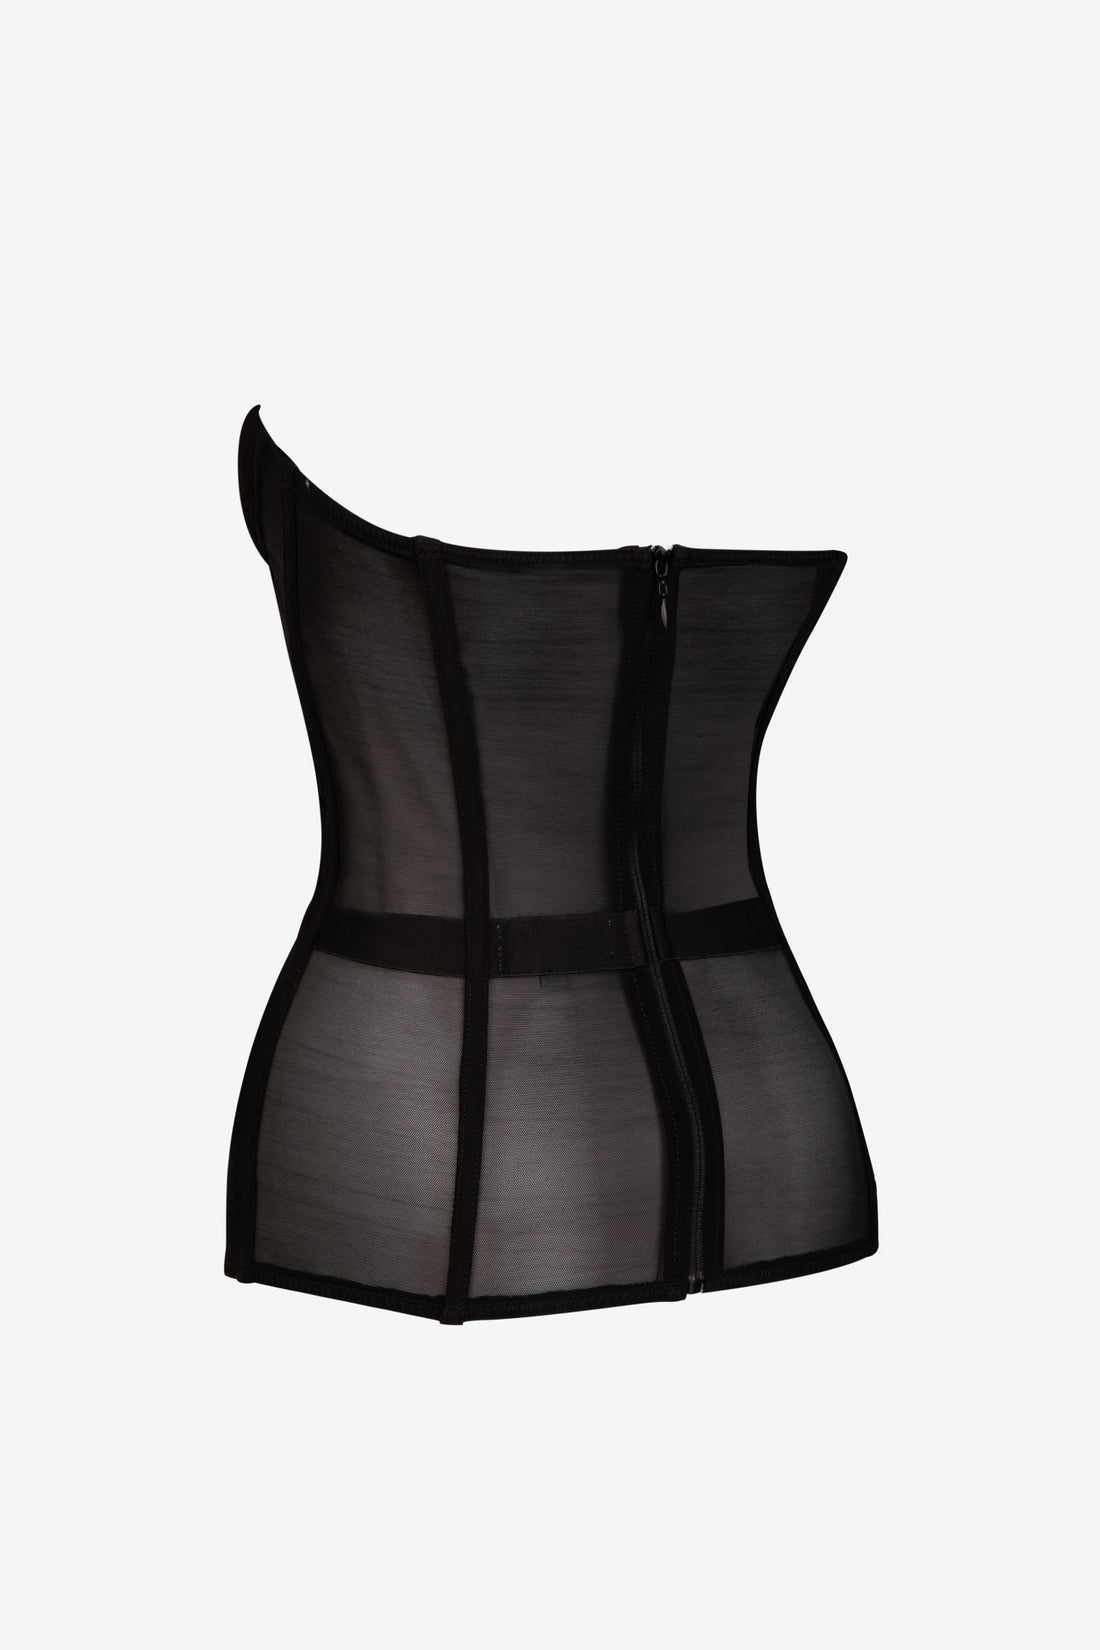 Strapless Black Mesh Corset Belt, Sexy Bustiers off Shoulder Crop Top,  Transparent Tightlacing for Woman, Plus Size Waist Training Corset -   Canada